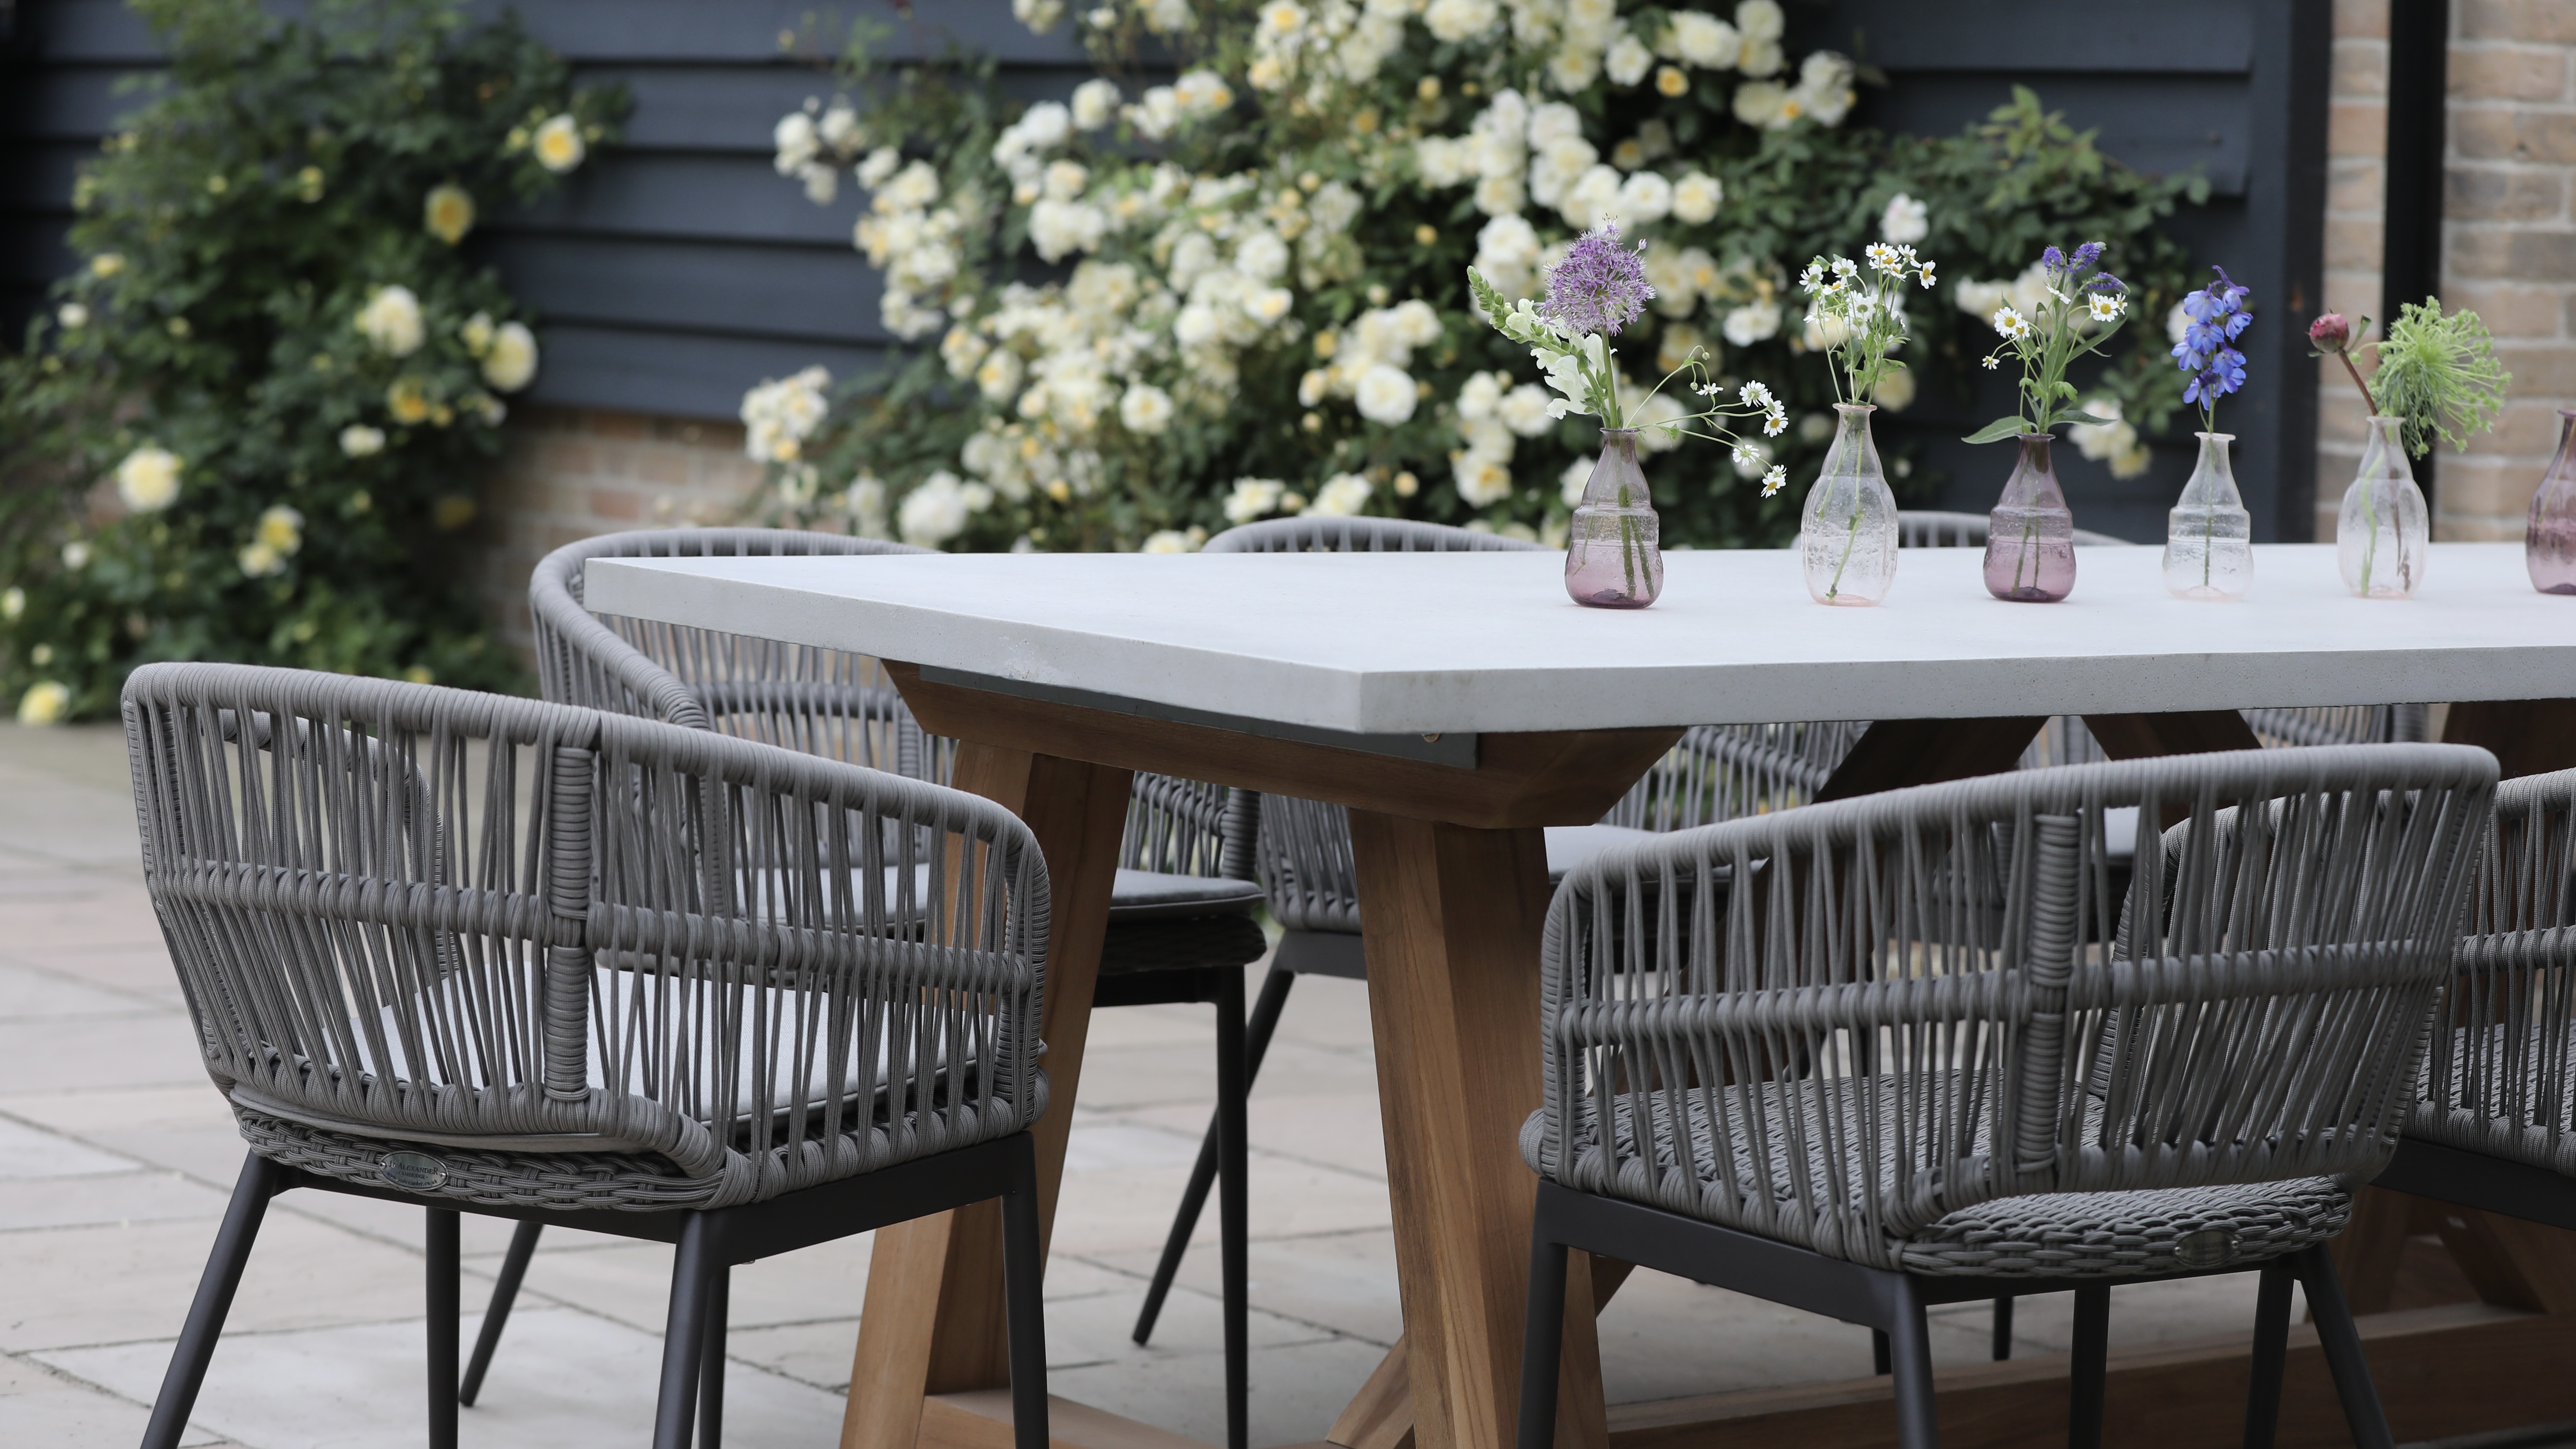 20% OFF CHAIRS AND SEAT PADS WITH DINING TABLE PURCHASE*